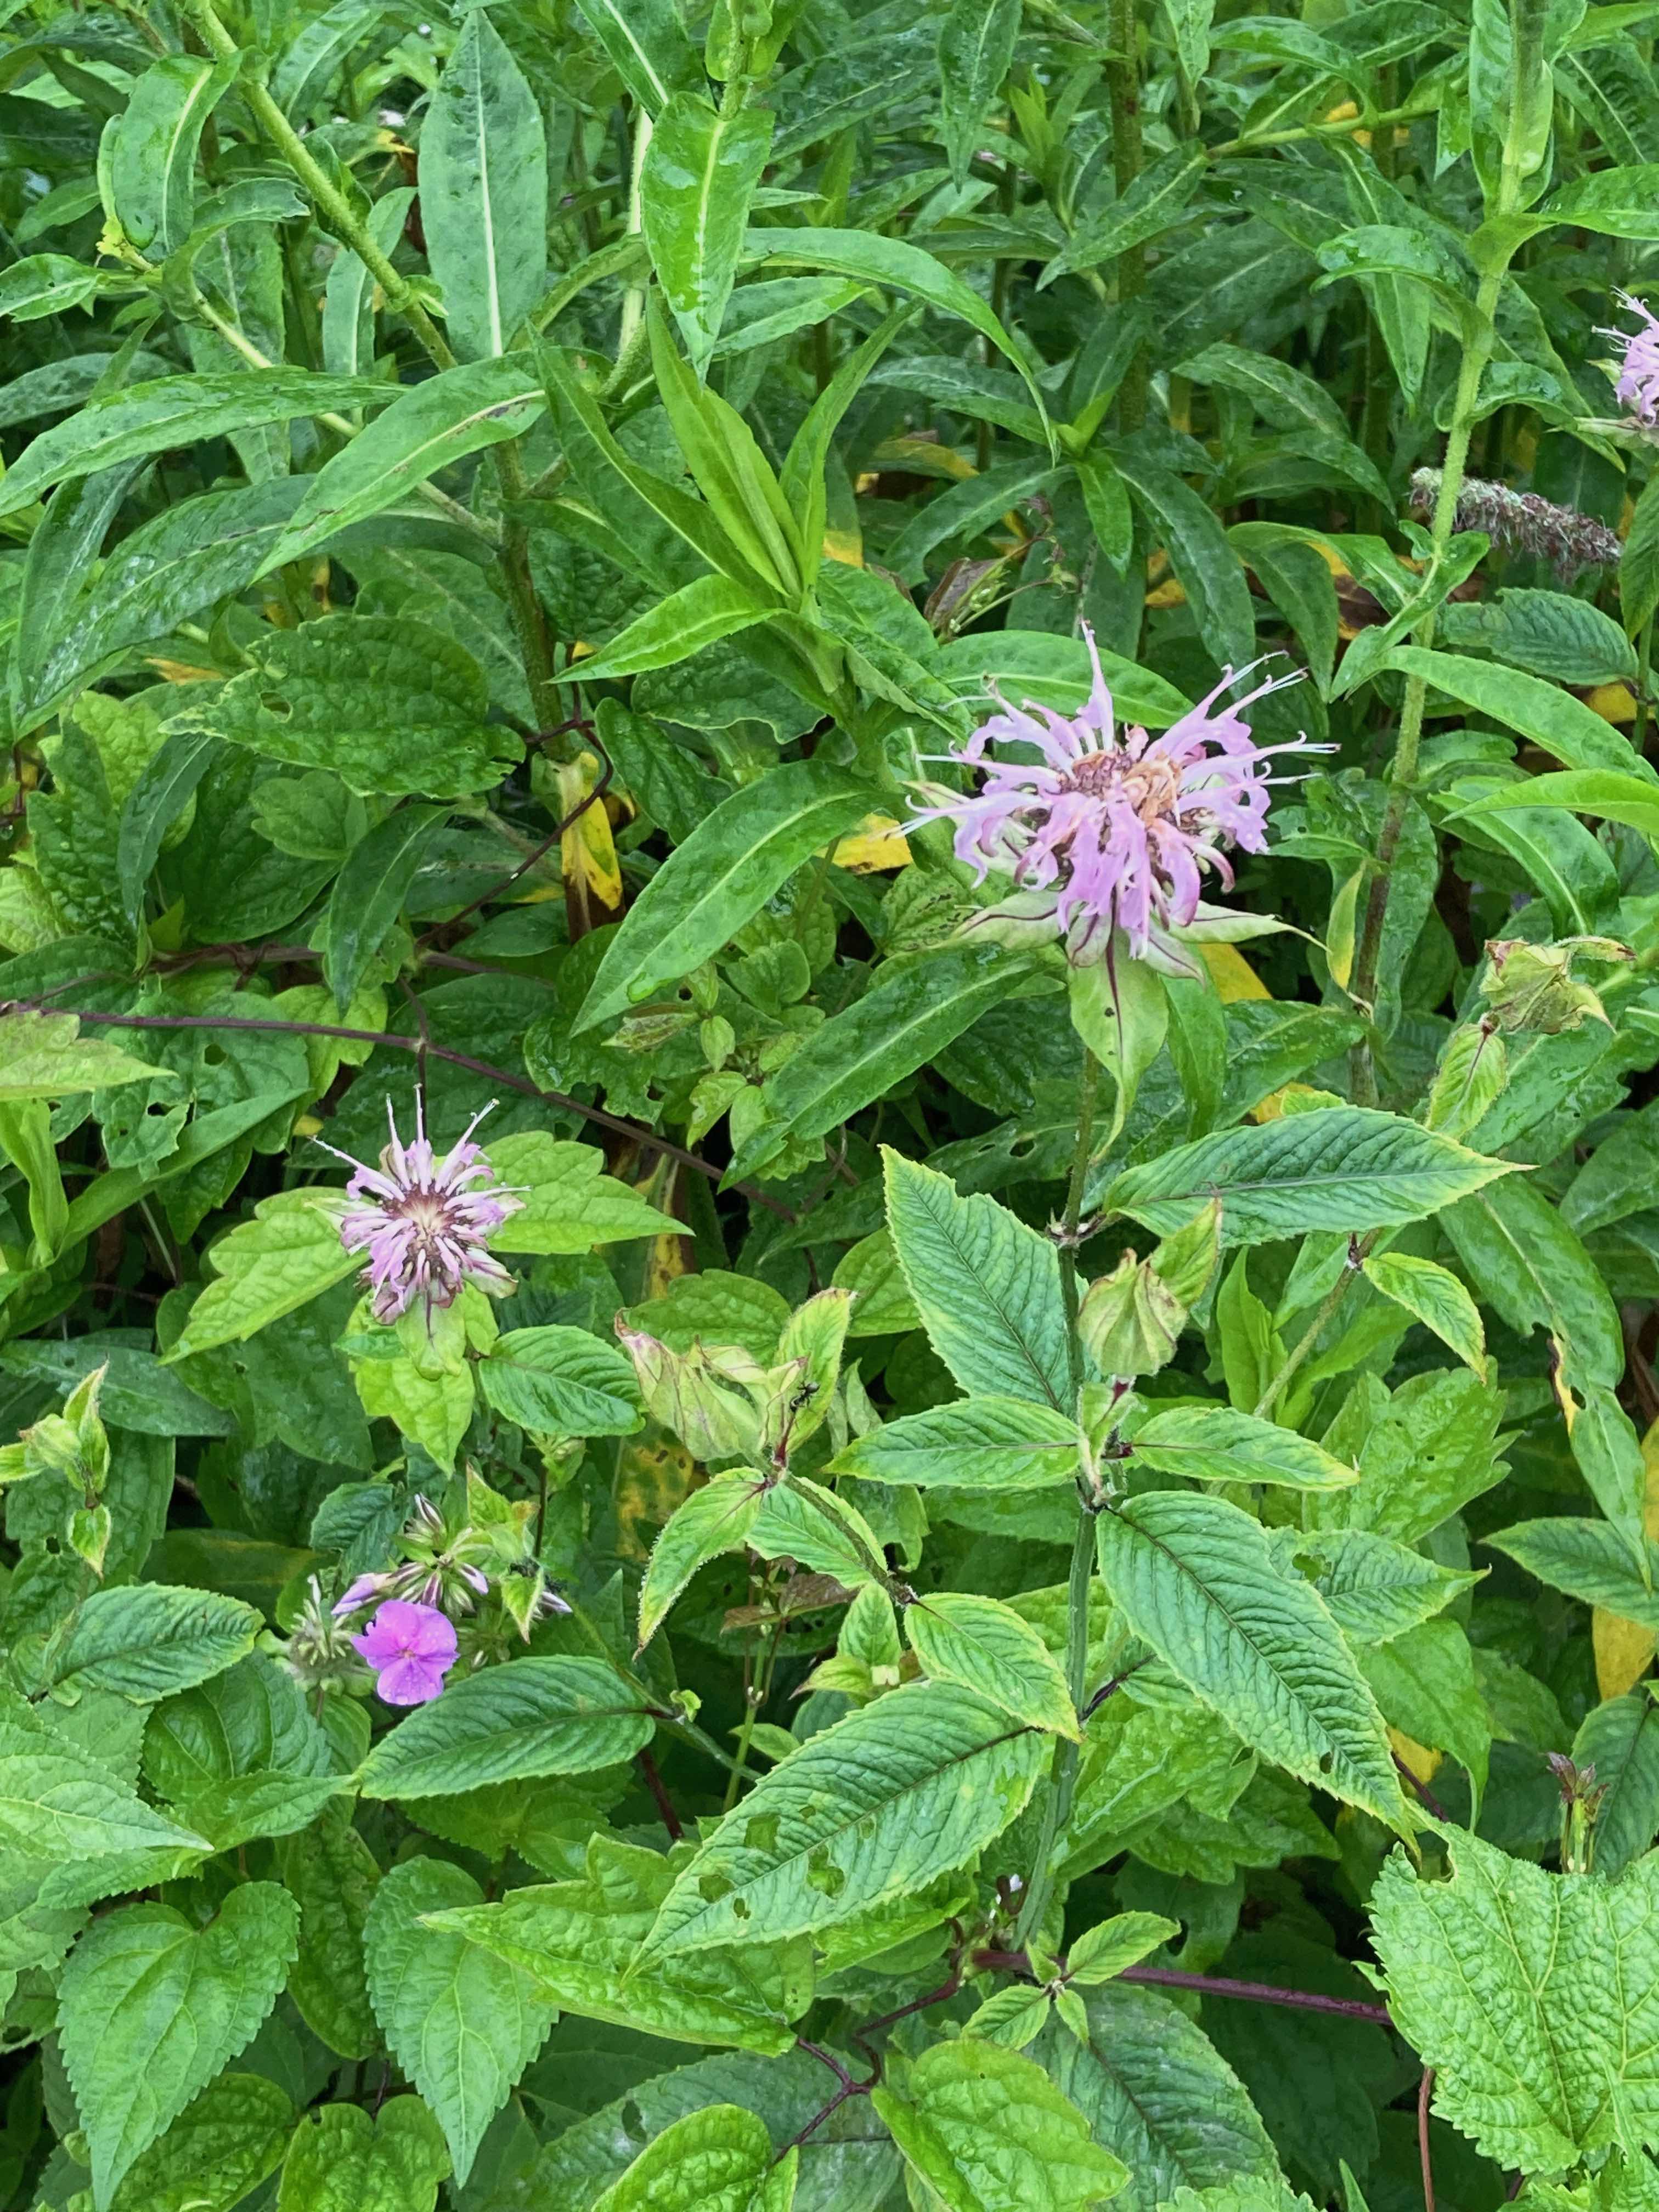 The Scientific Name is Monarda fistulosa. You will likely hear them called Wild Bergamot. This picture shows the Opposite leaves along the square stems; lavender to bright pink flowers. of Monarda fistulosa